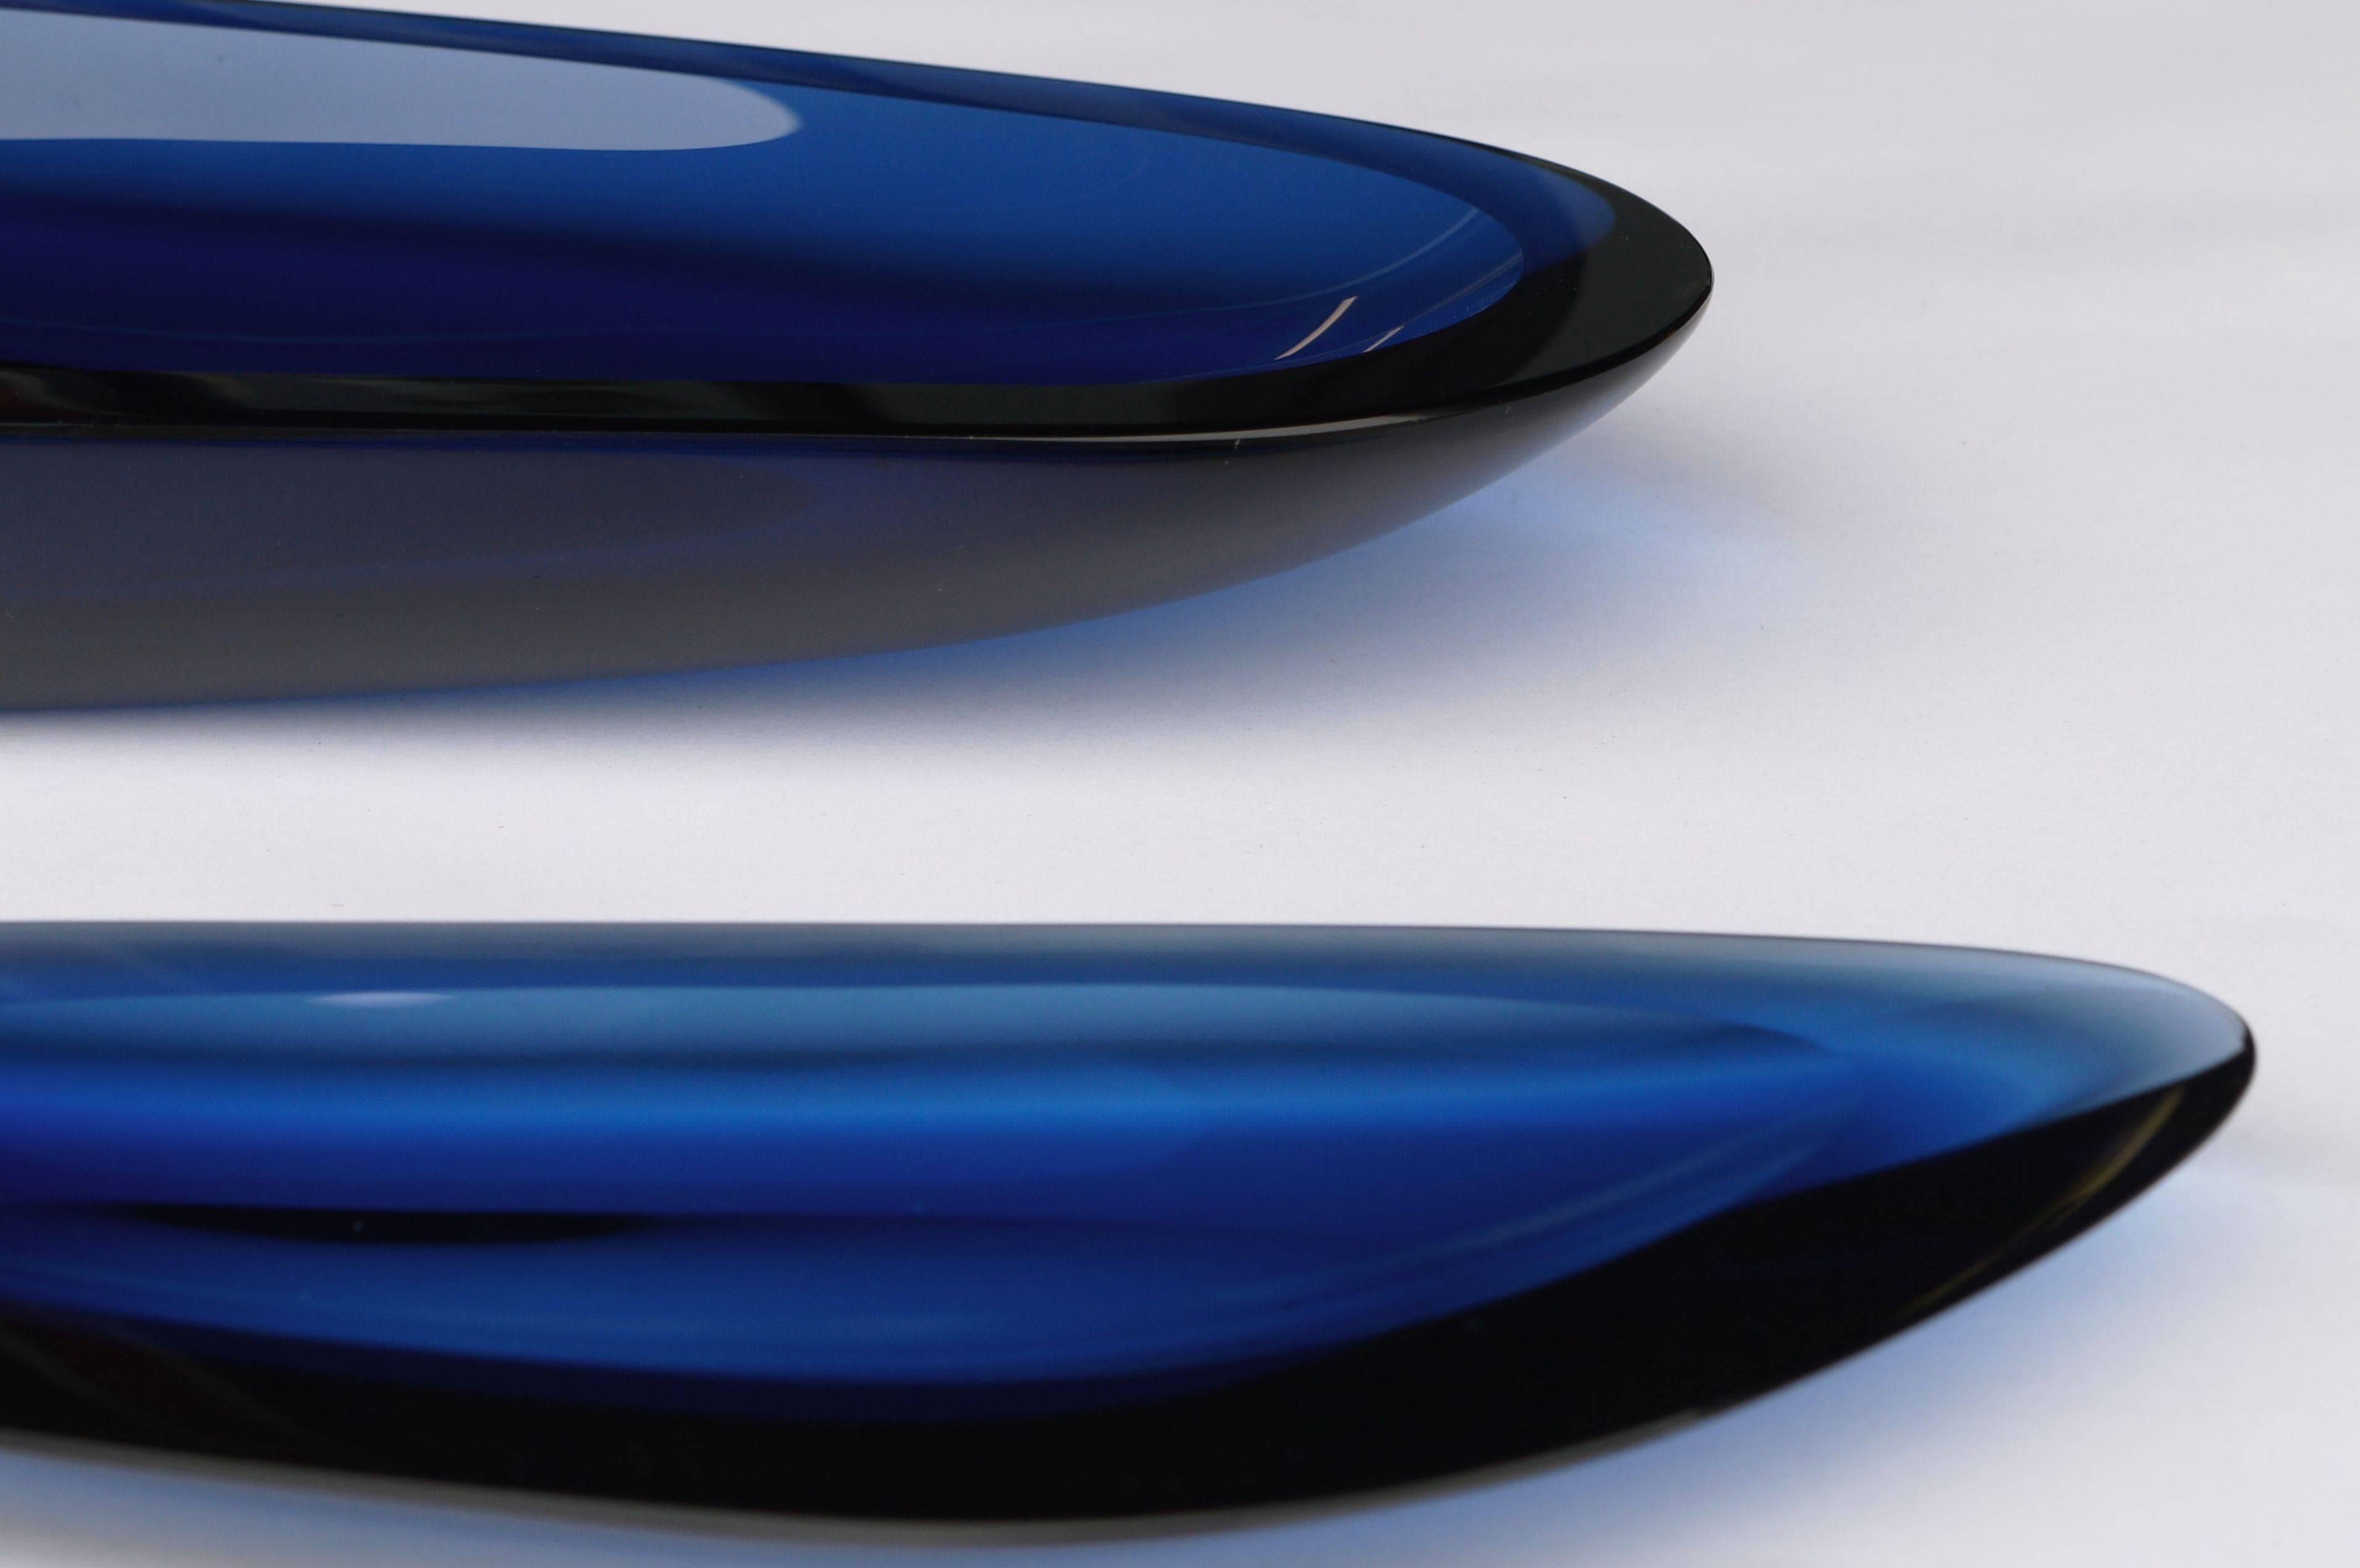 Stunning sleek hand-carved glass bowls by Ghiro Studio. Each piece is signed on underside. Larger bowl measures 15.5